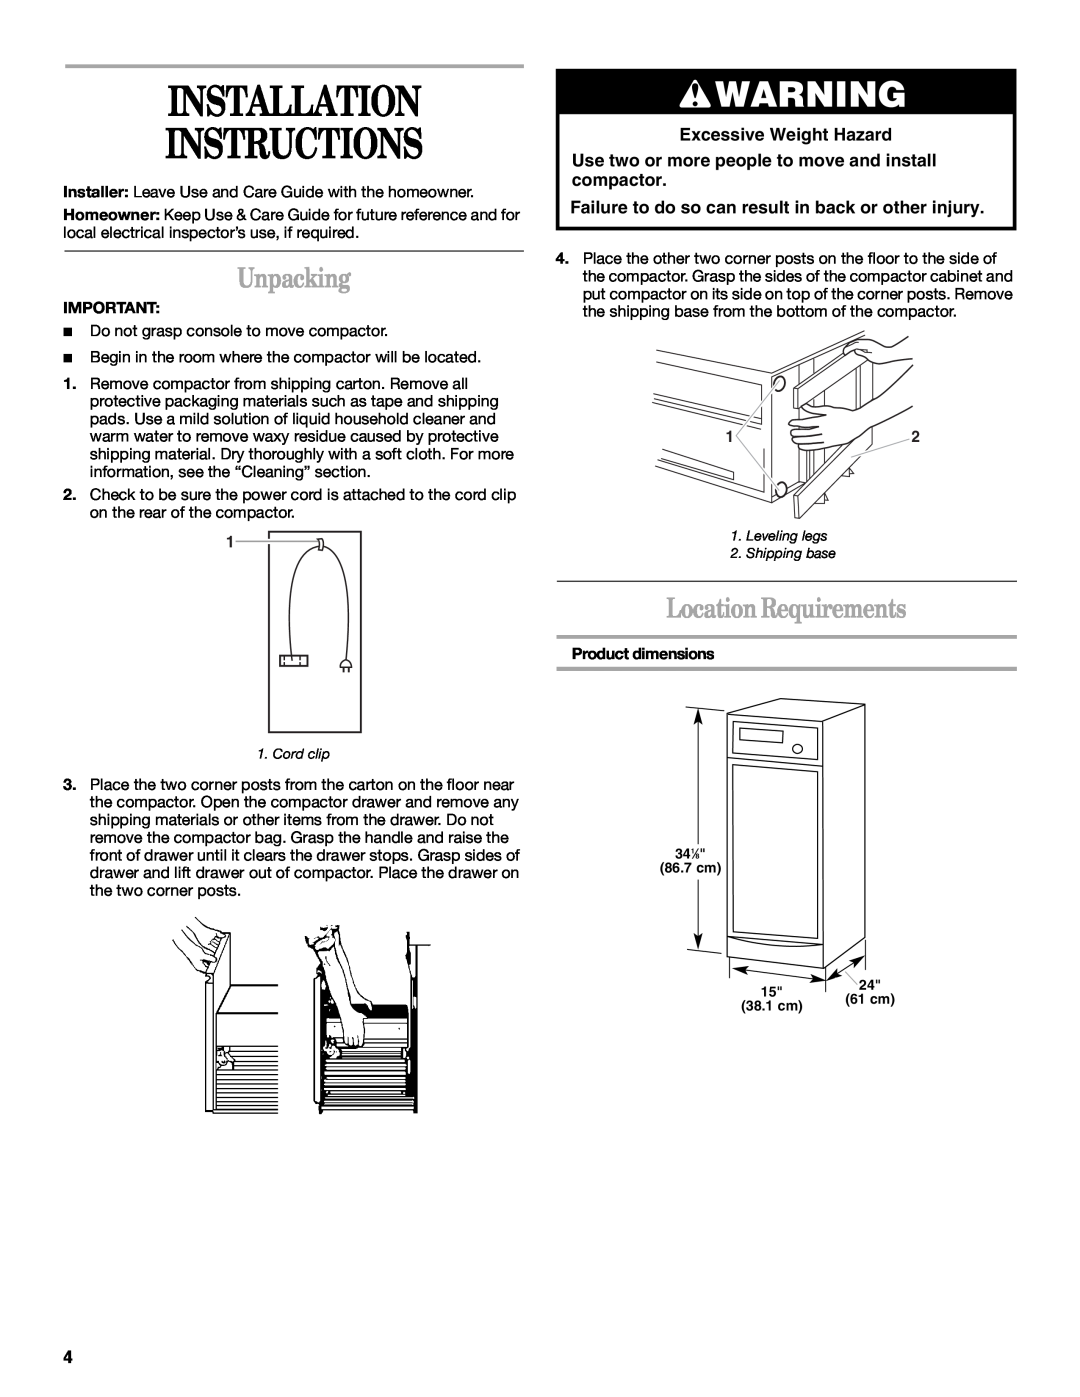 Whirlpool Compactor manual Installation Instructions, Unpacking, Location Requirements, Excessive Weight Hazard 